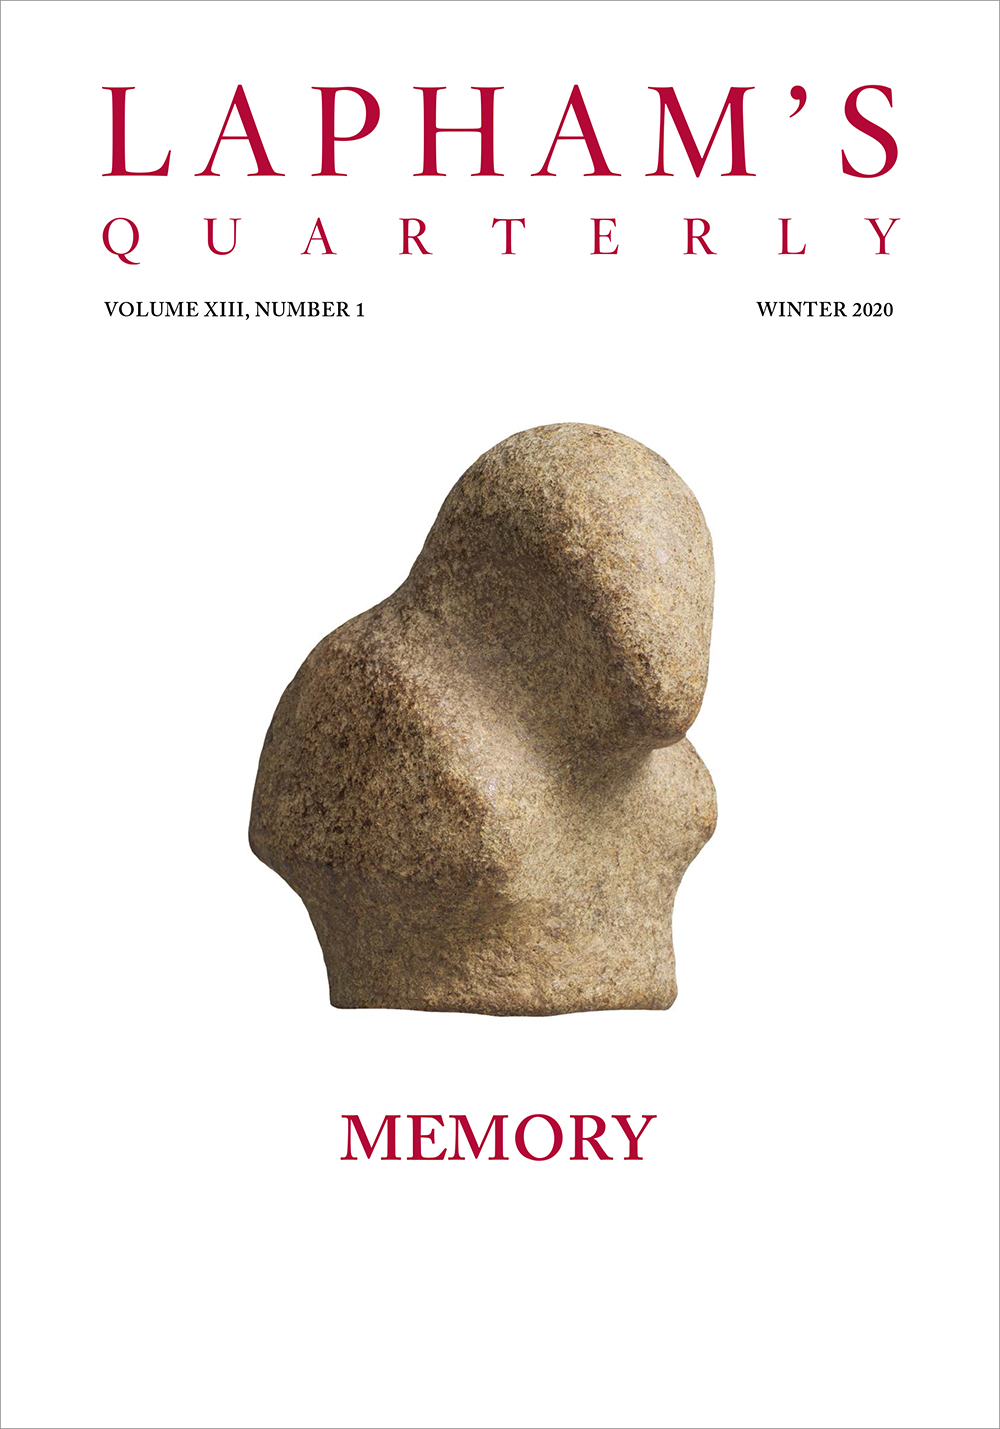 Cover of Memory, the Winter 2020 issue of Lapham’s Quarterly.